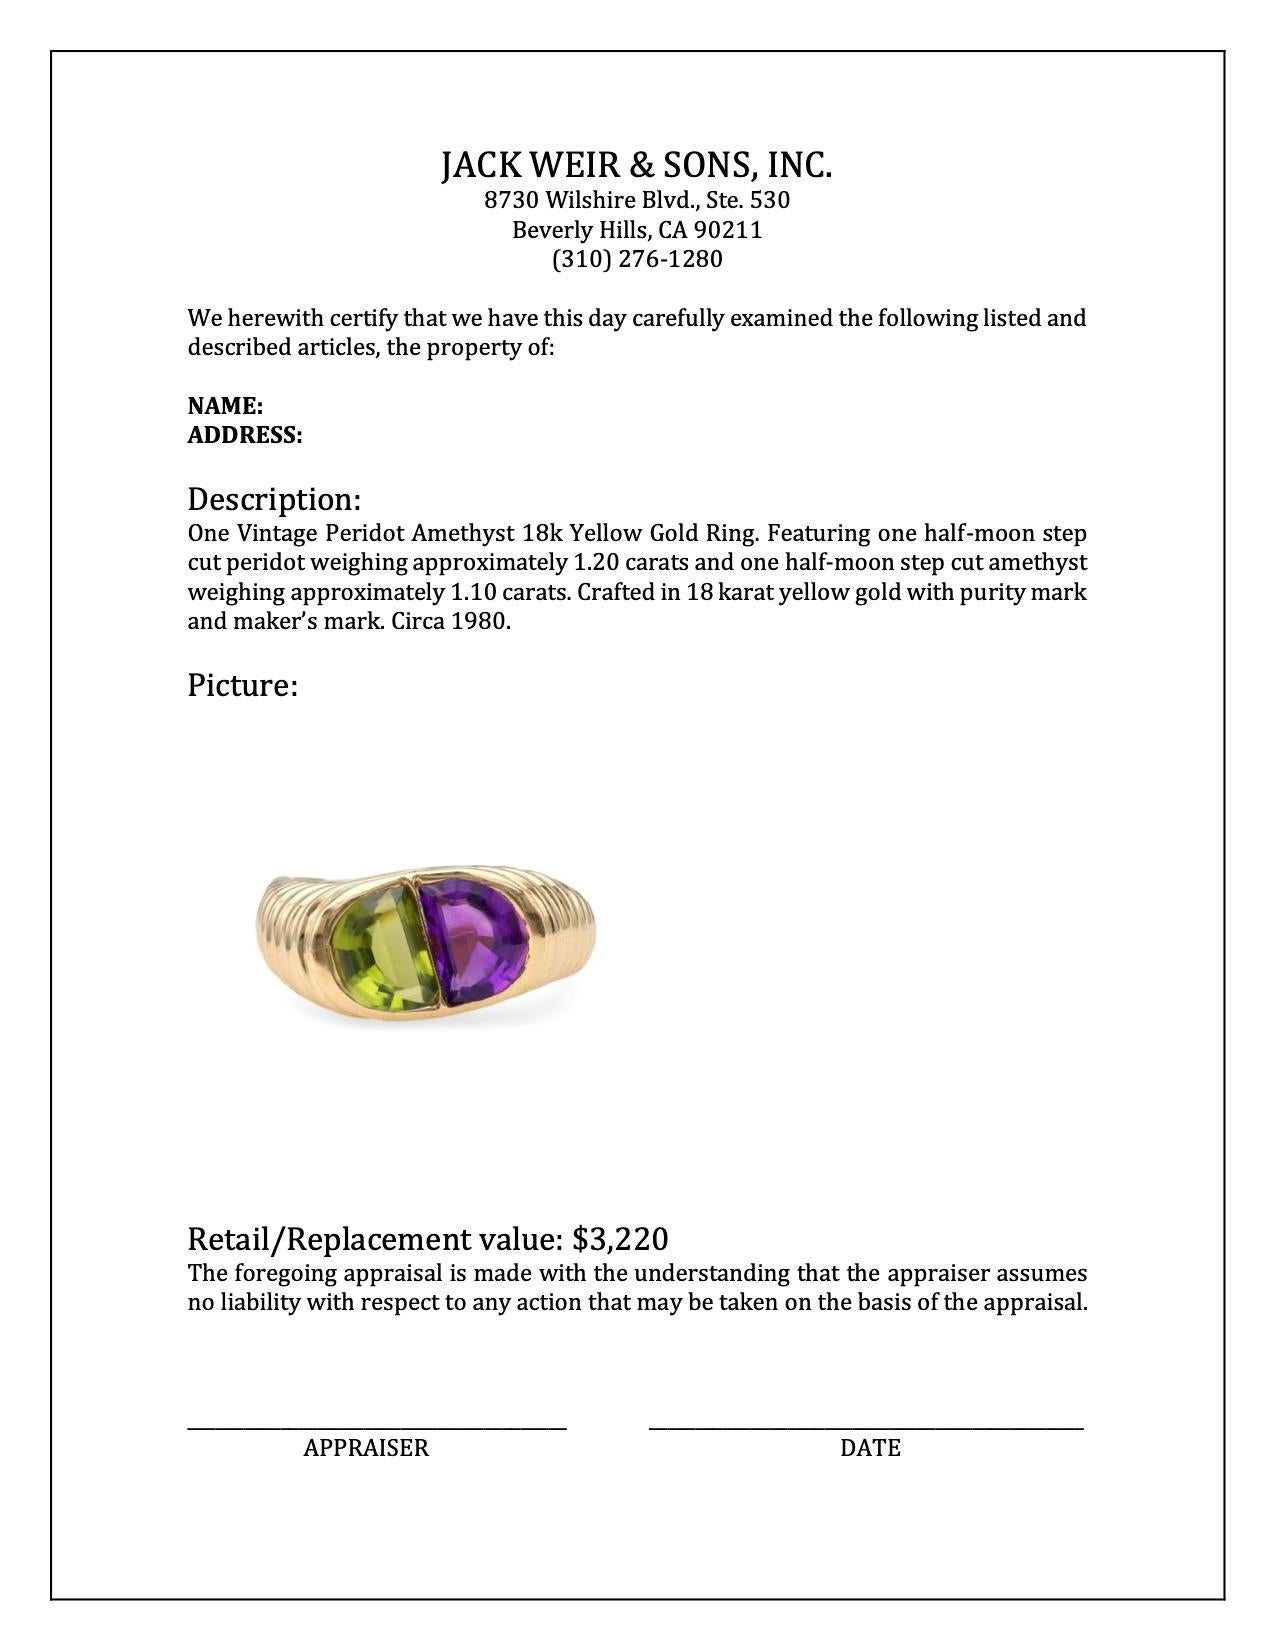 Women's or Men's Vintage Peridot Amethyst 18k Yellow Gold Ring For Sale